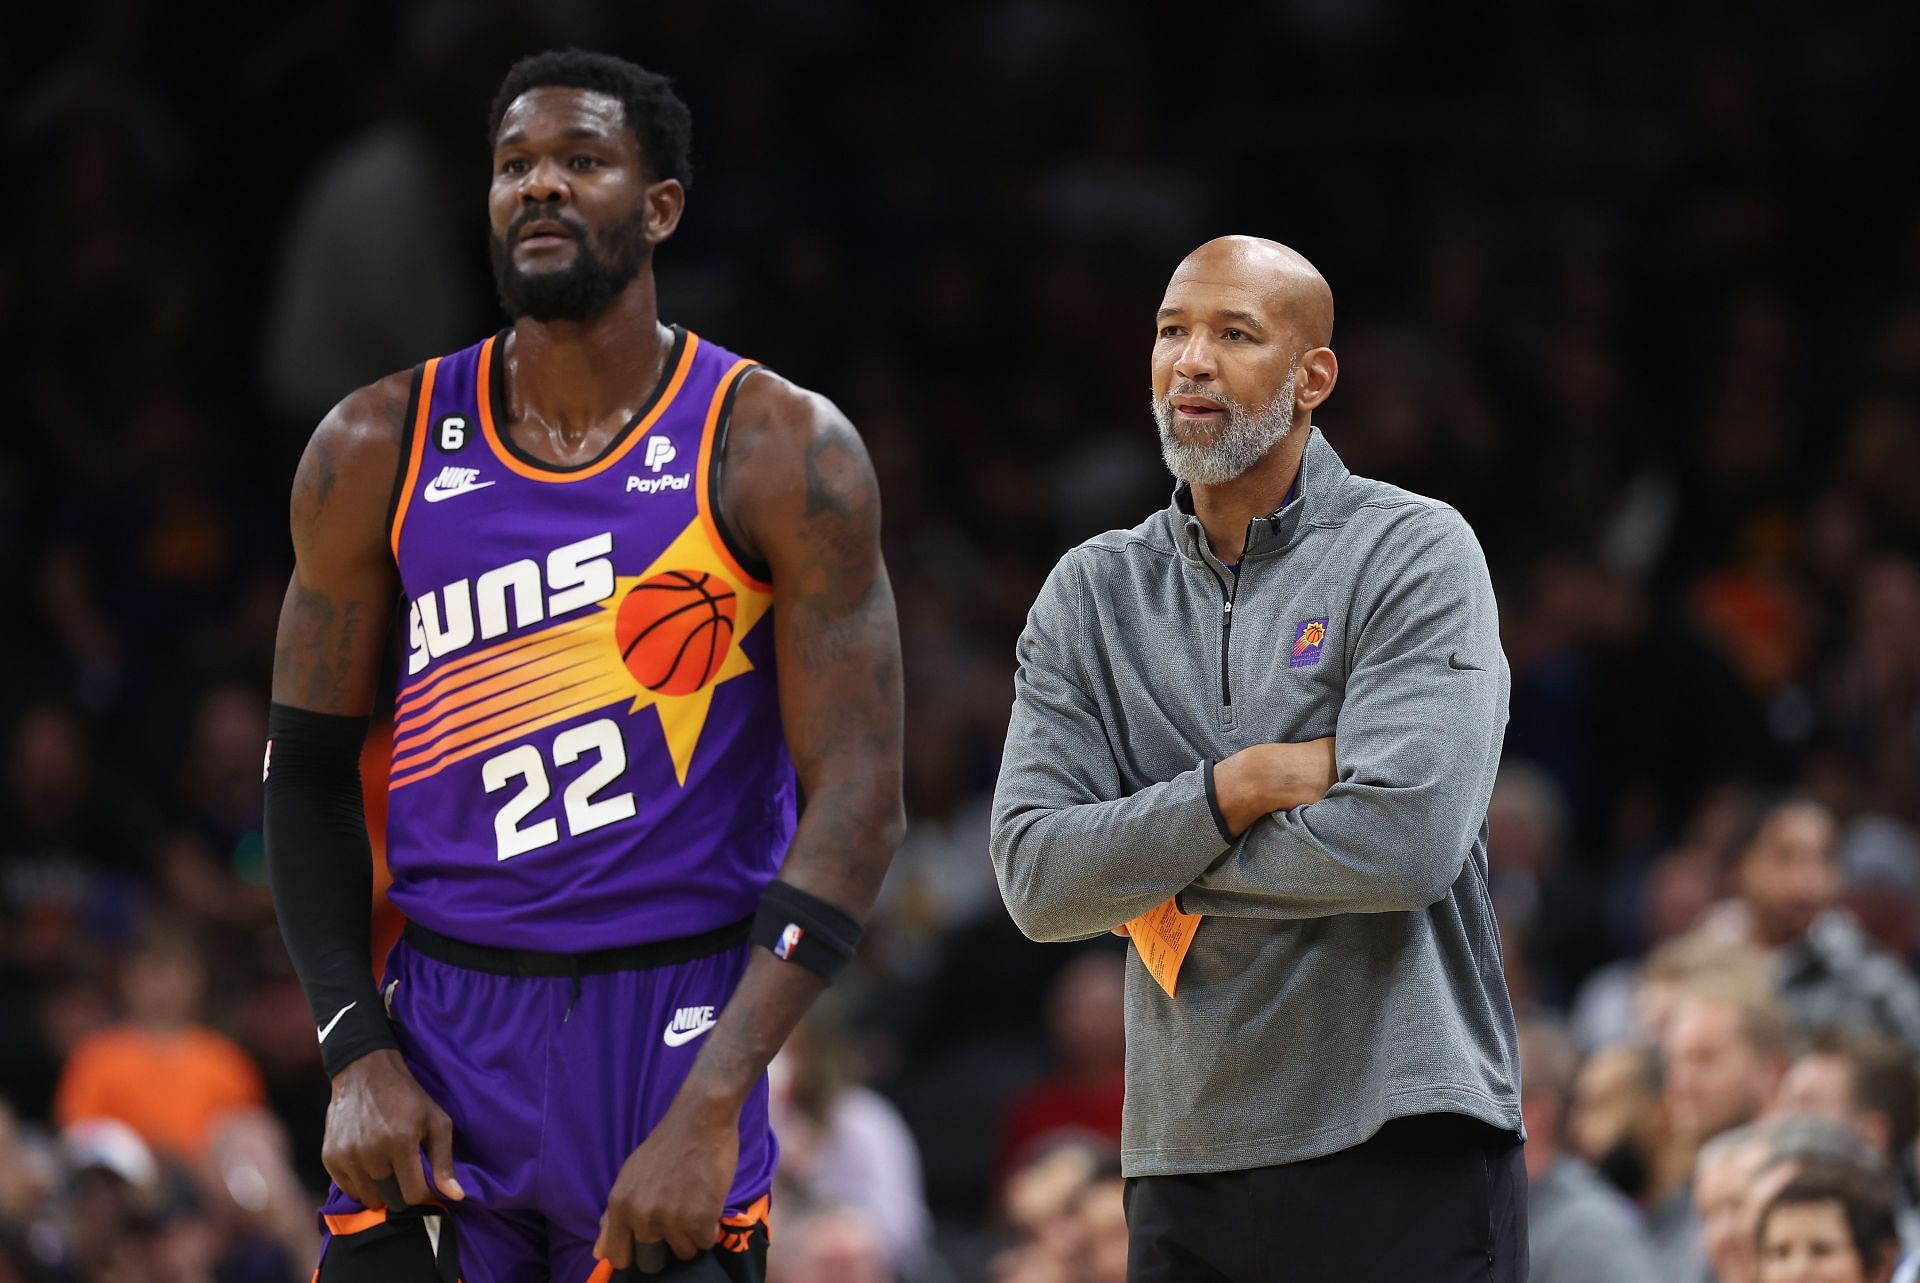 Deandre Ayton and Monty Williams look on at a game